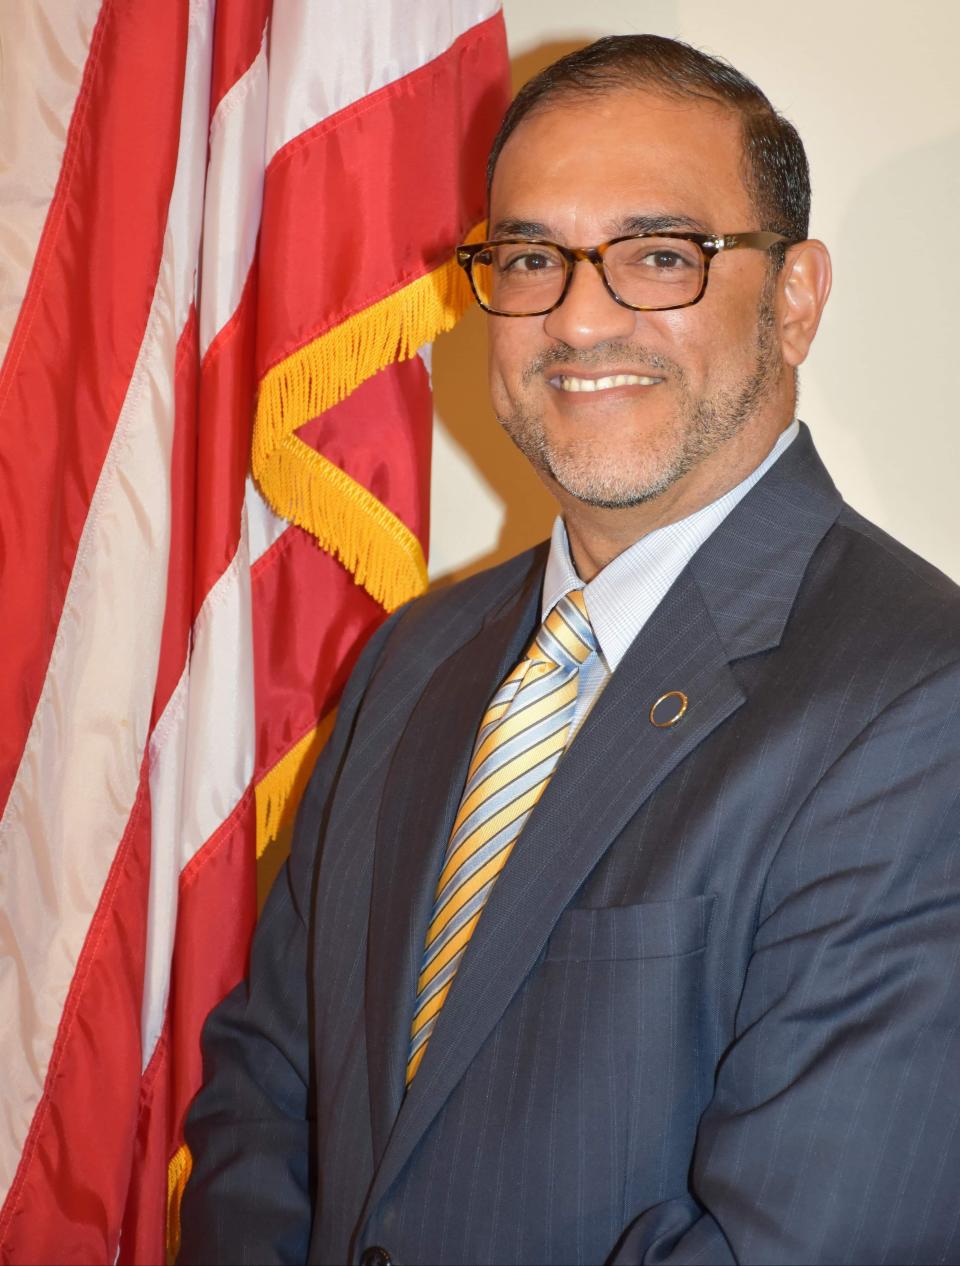 Victor Ramos is running for the District 5 Volusia County Council seat. He finished second in Tuesday's primary race.